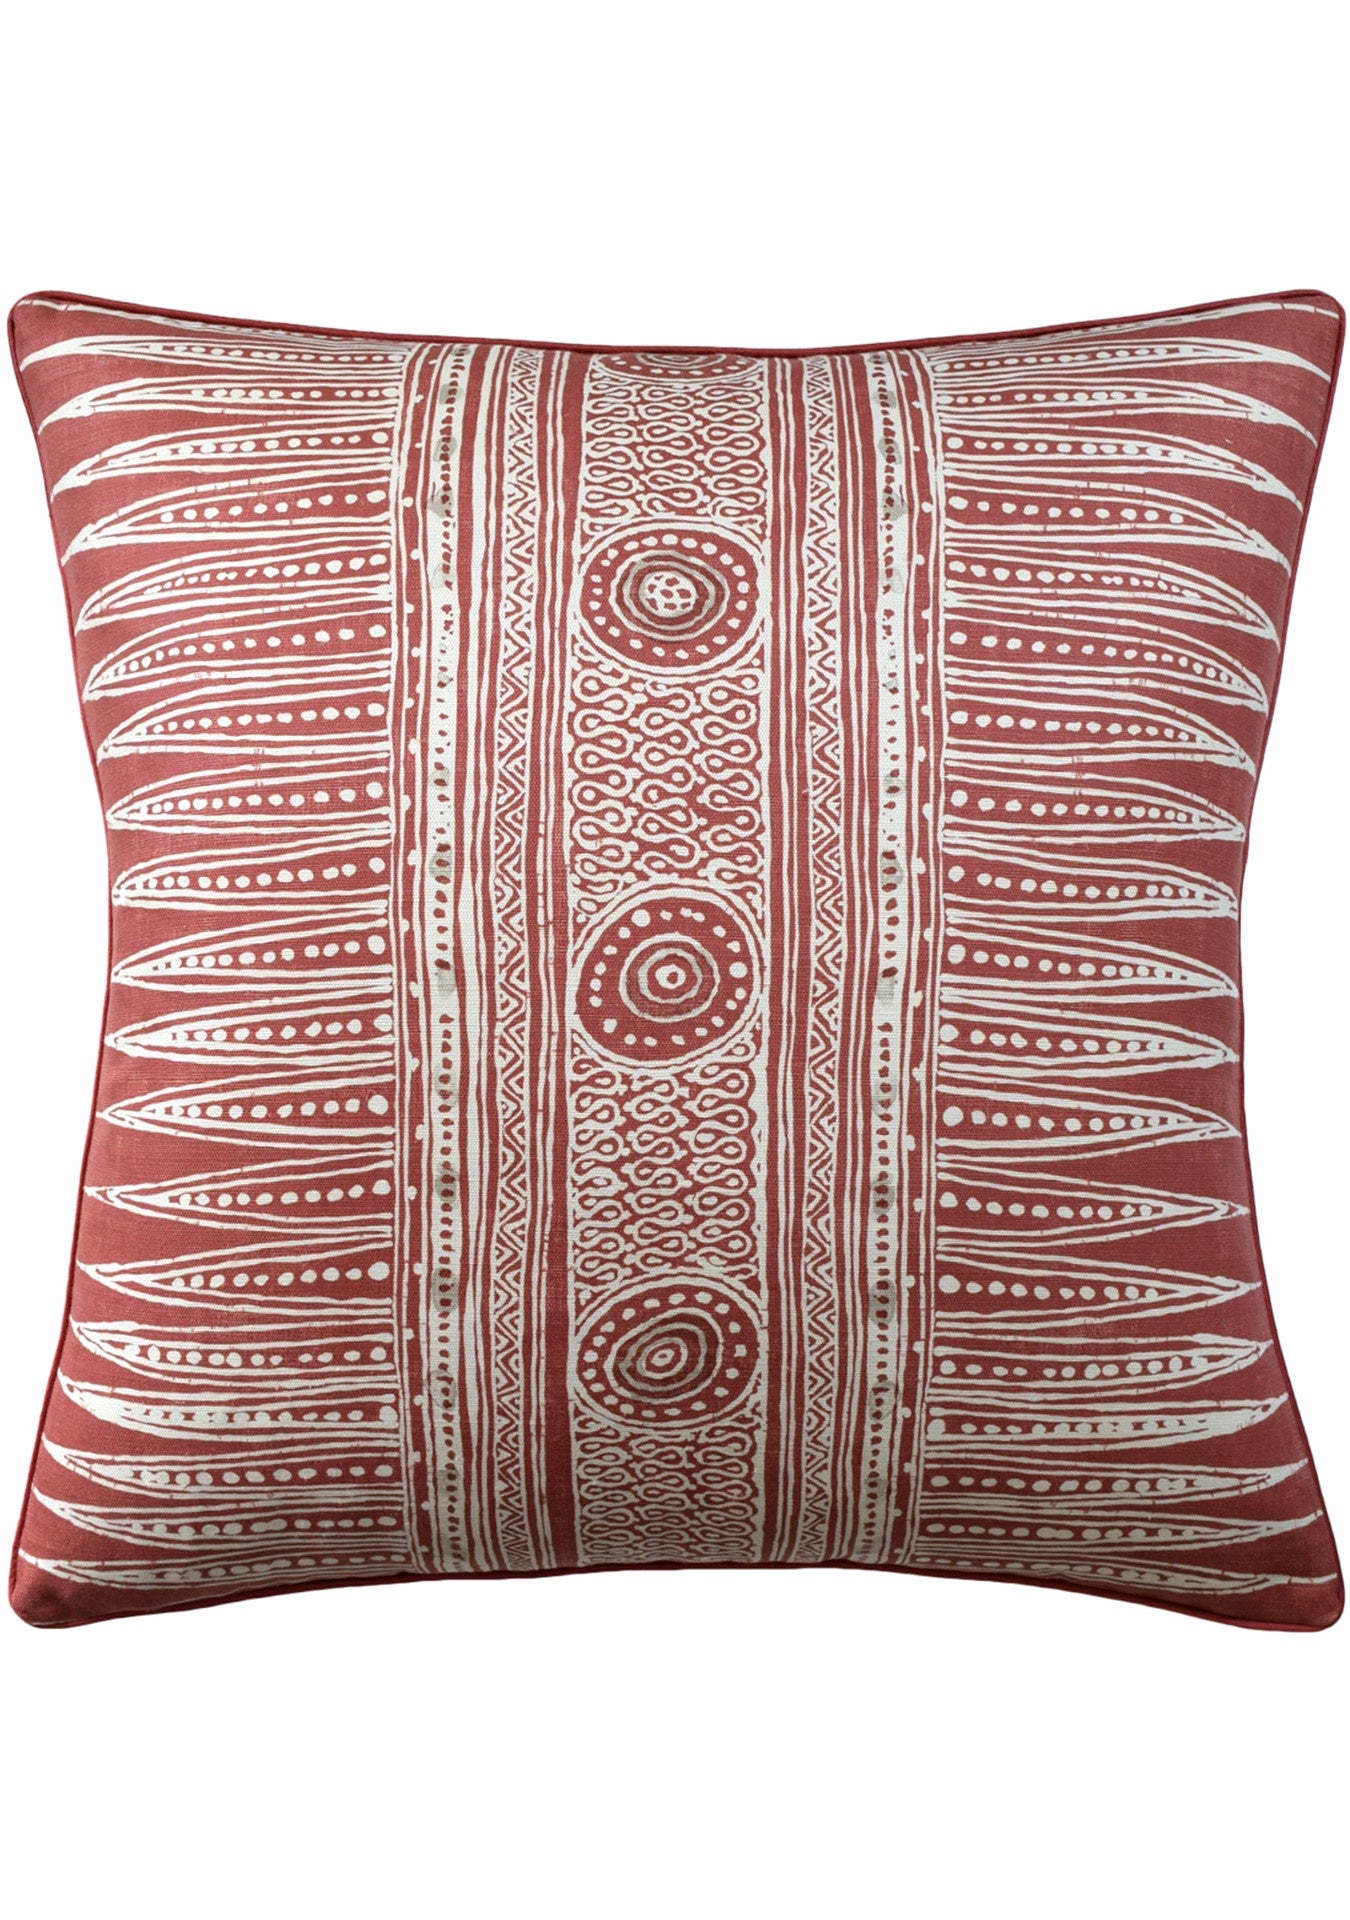 A decorative pillow with intricate, symmetrical red and white patterns, including circles and linear designs, on a bungalow-style fabric textured background from Indian Zag by Ryan Studio.